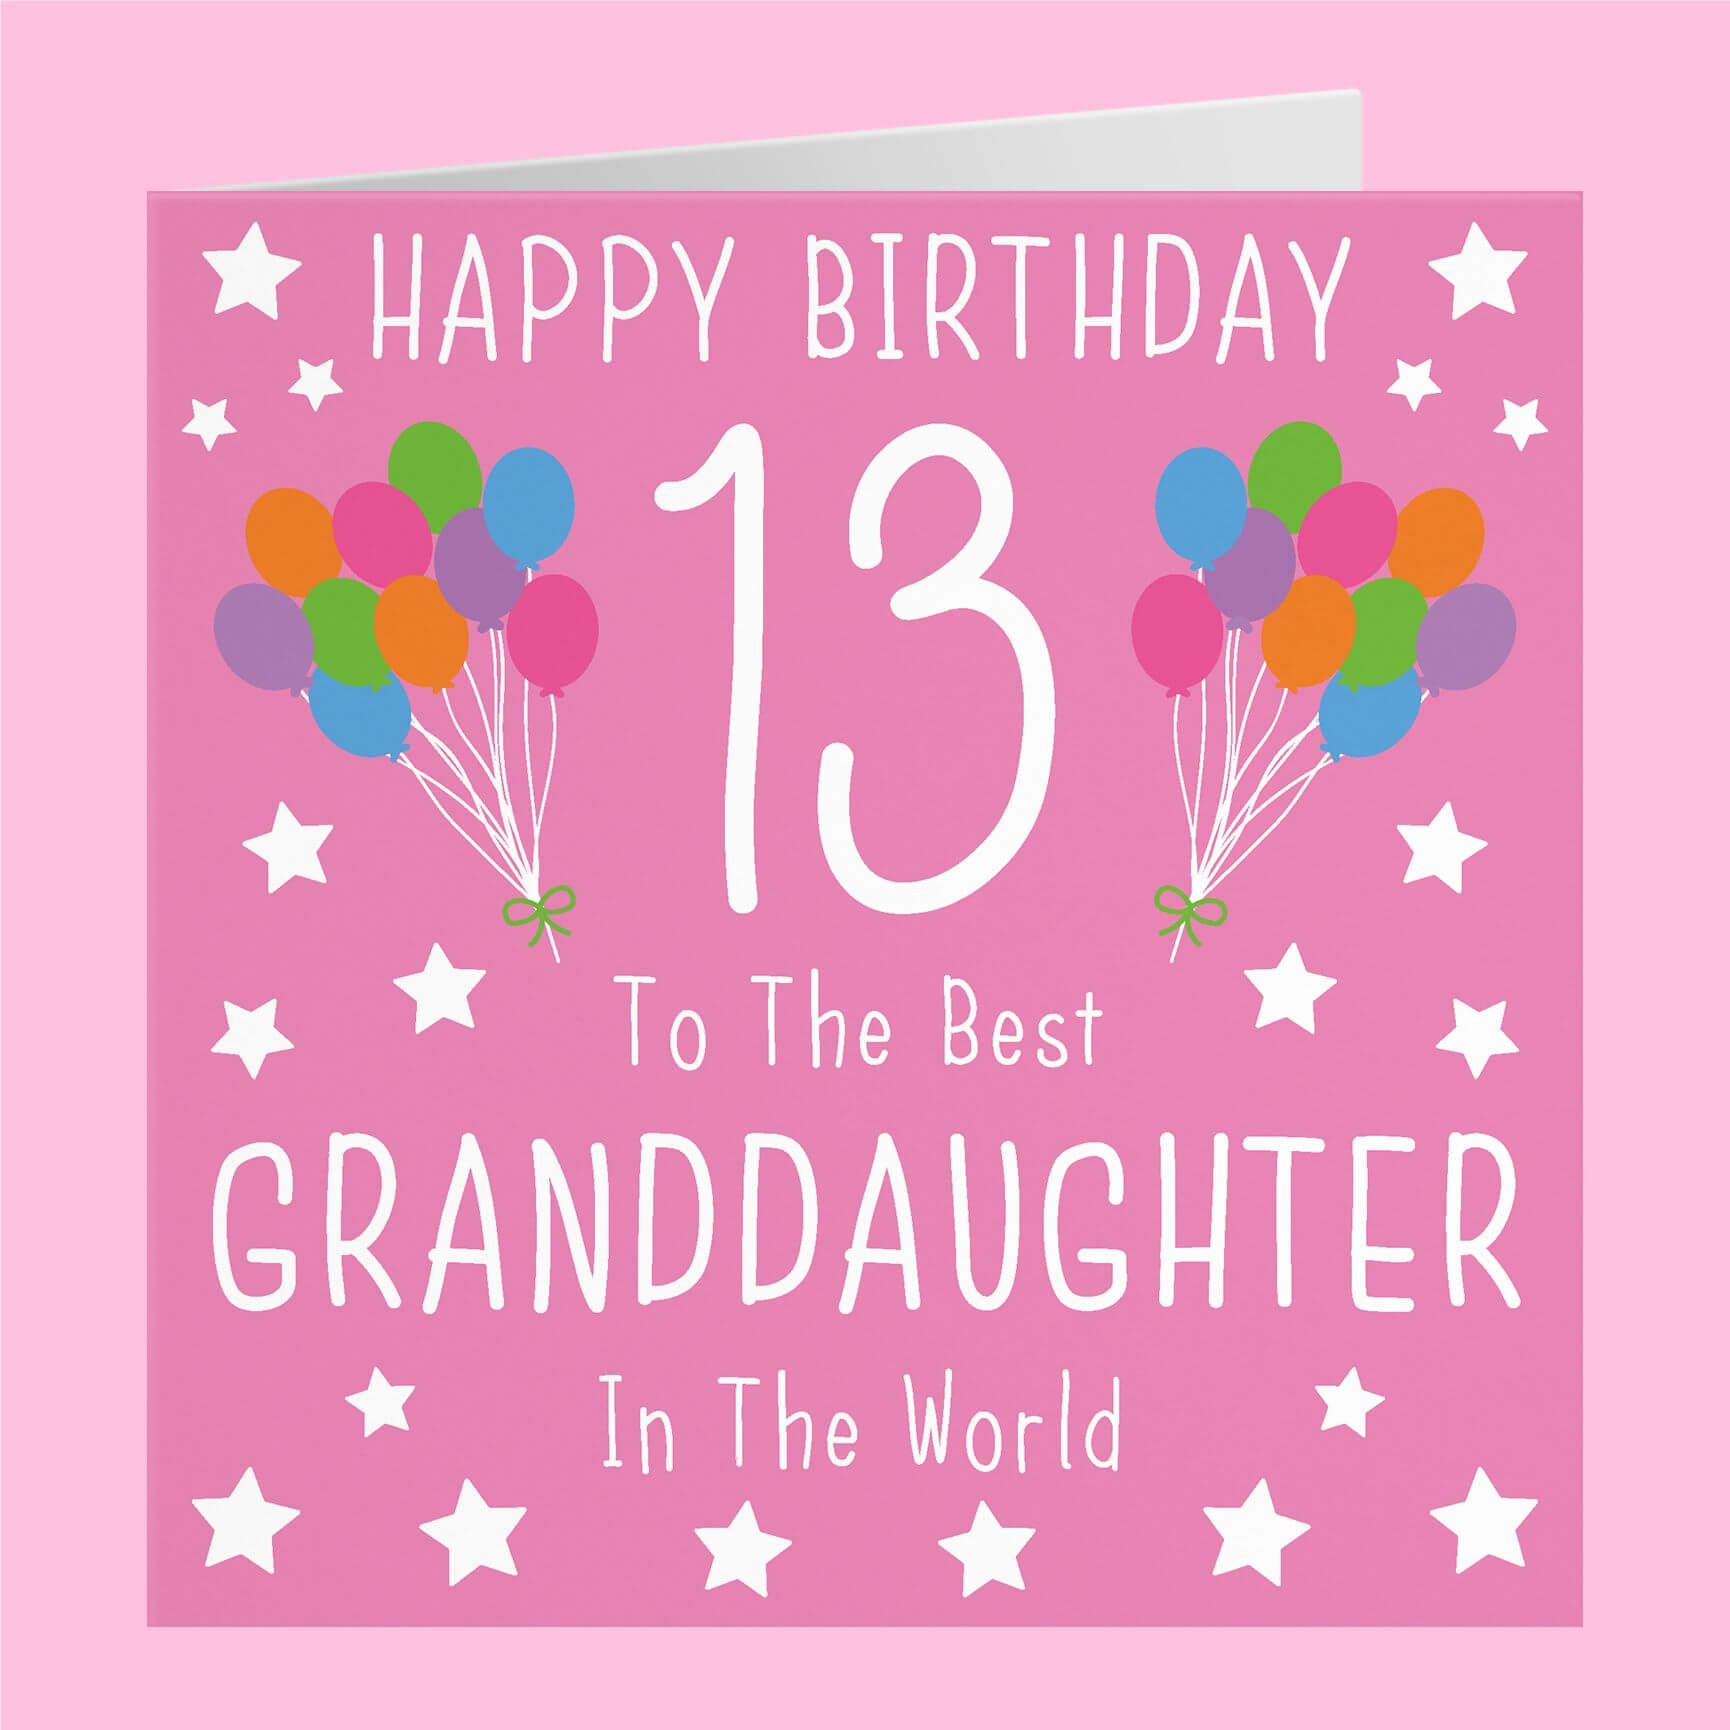 Happy 13th Birthday Granddaughter Messages